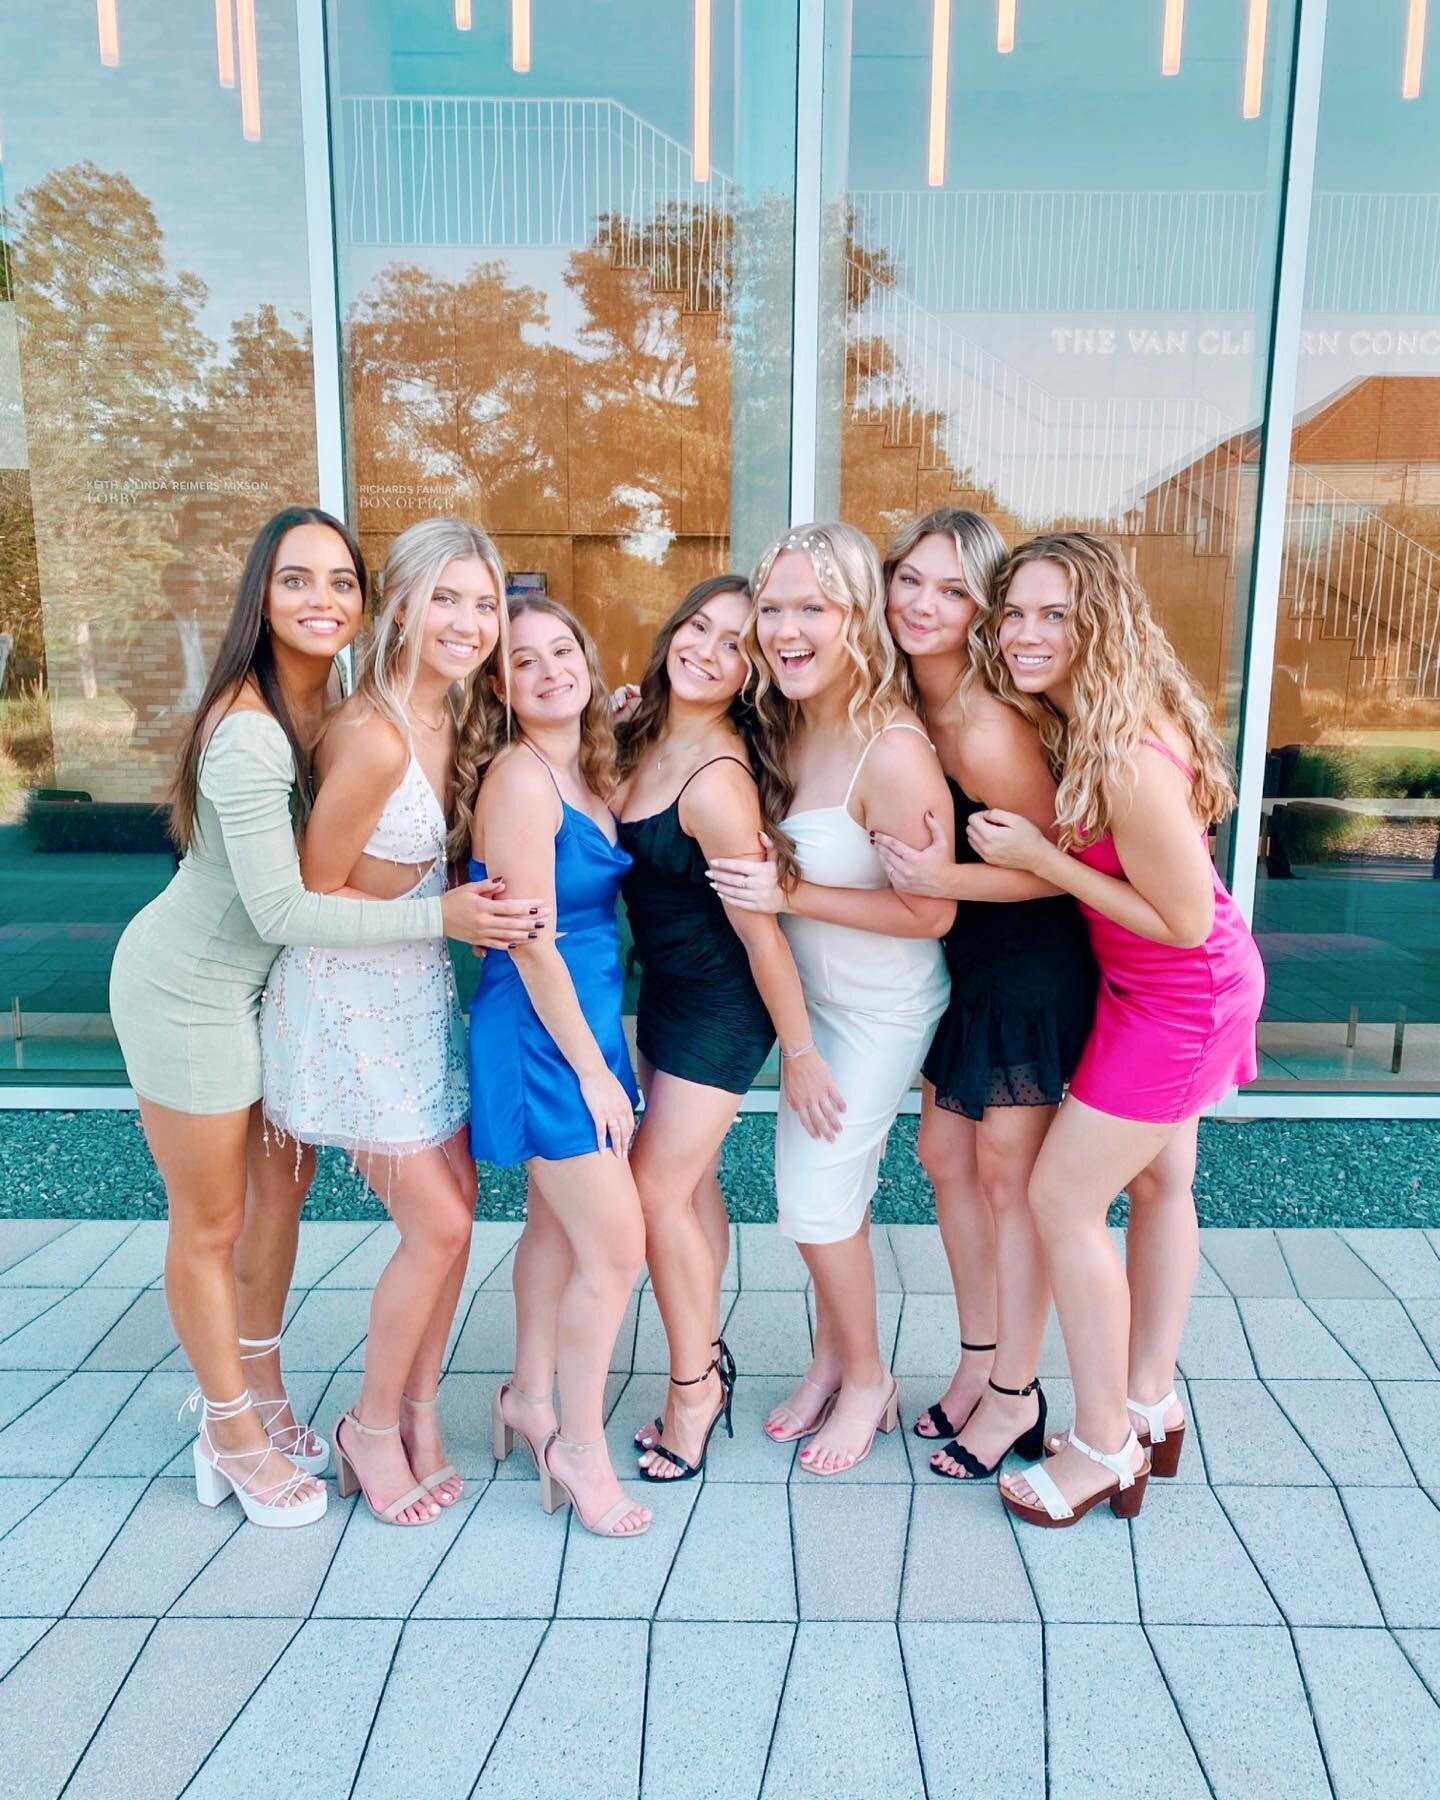 #HAPPYBIRTHDAY Alpha Delta Pi 🧁🪩 172 years of living for eachother 💗✨🎉

#gammachi #adpitcu